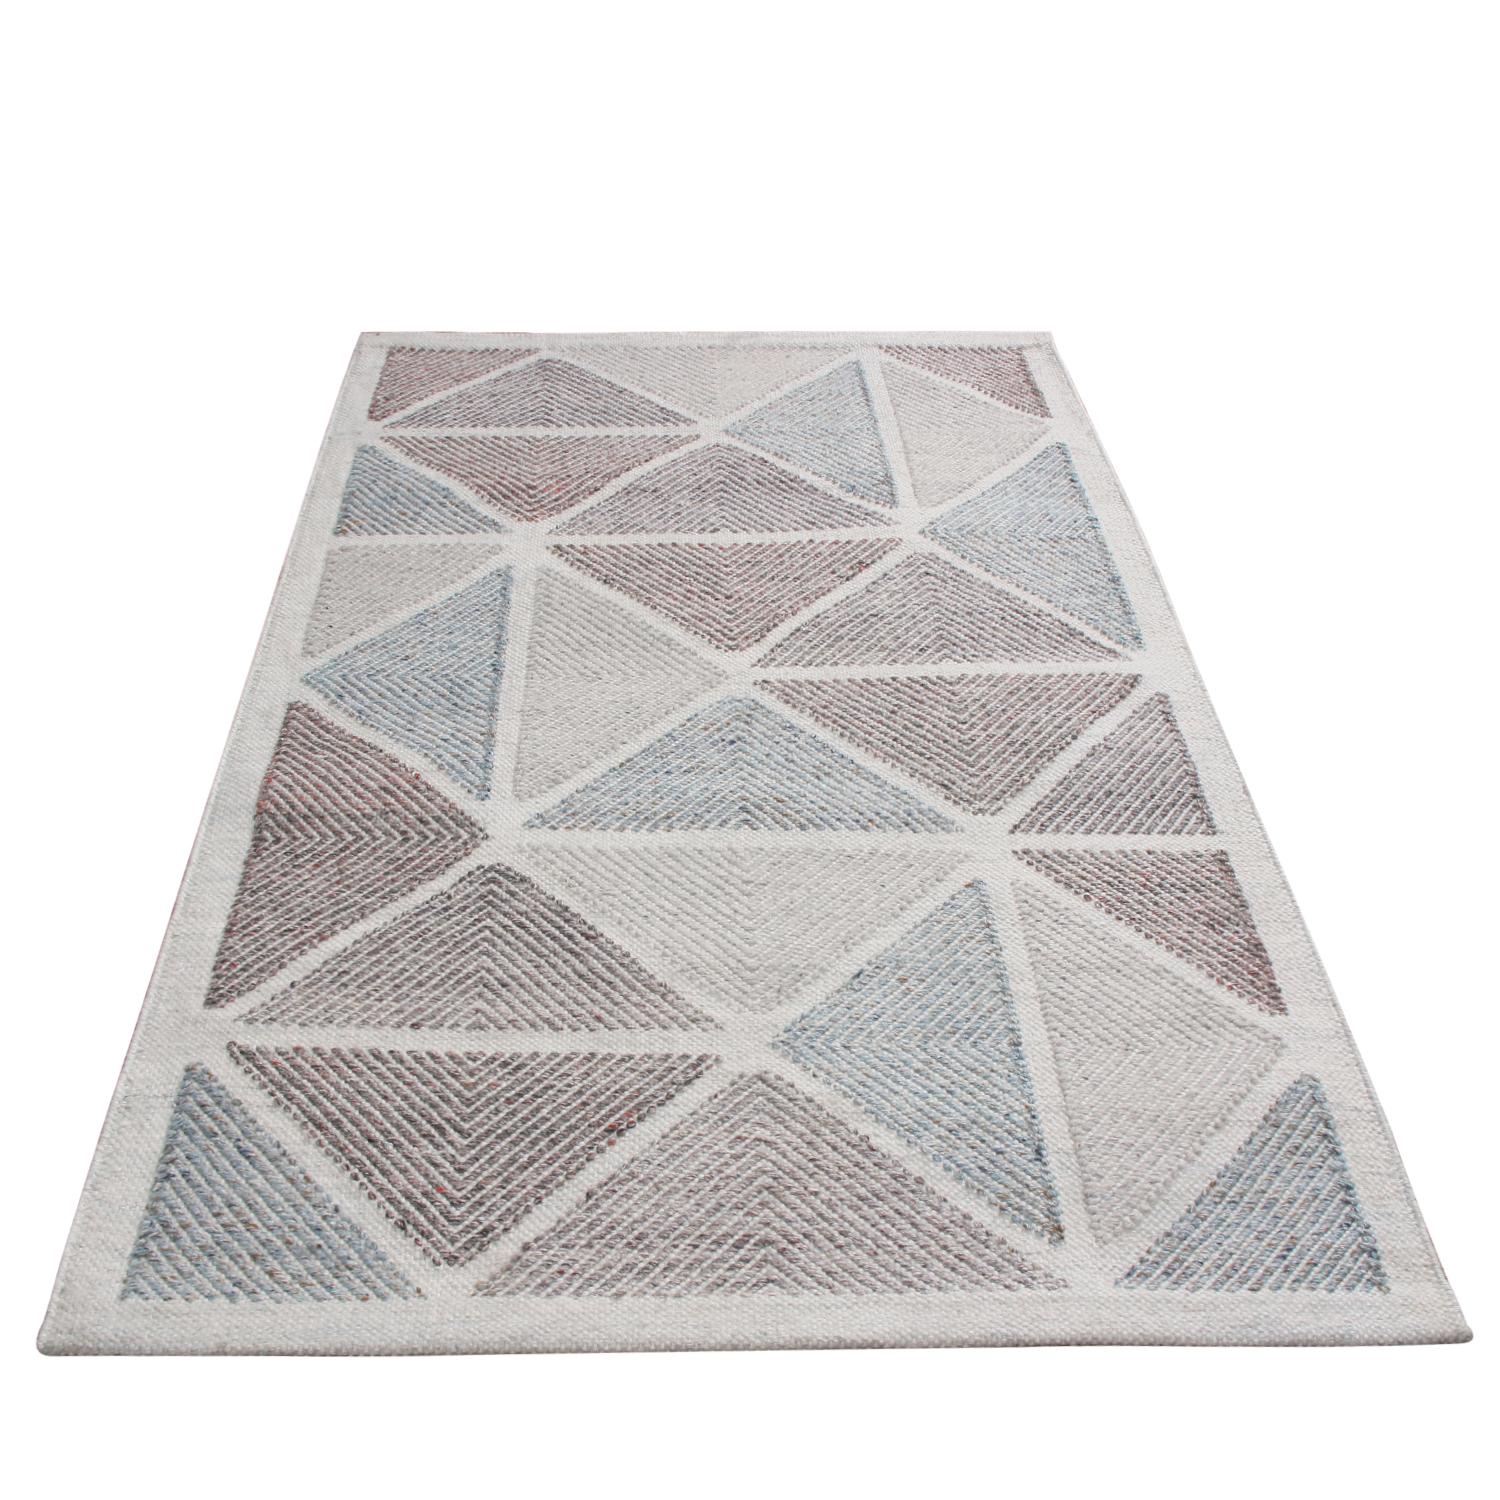 Originating from India, this natural polyester rug hails from Rug & Kilim’s Outdoor line among its Scandinavian collection, featuring designs including this chic, rippling interpretation of celebrated Moroccan diamond patterns in earth tones and